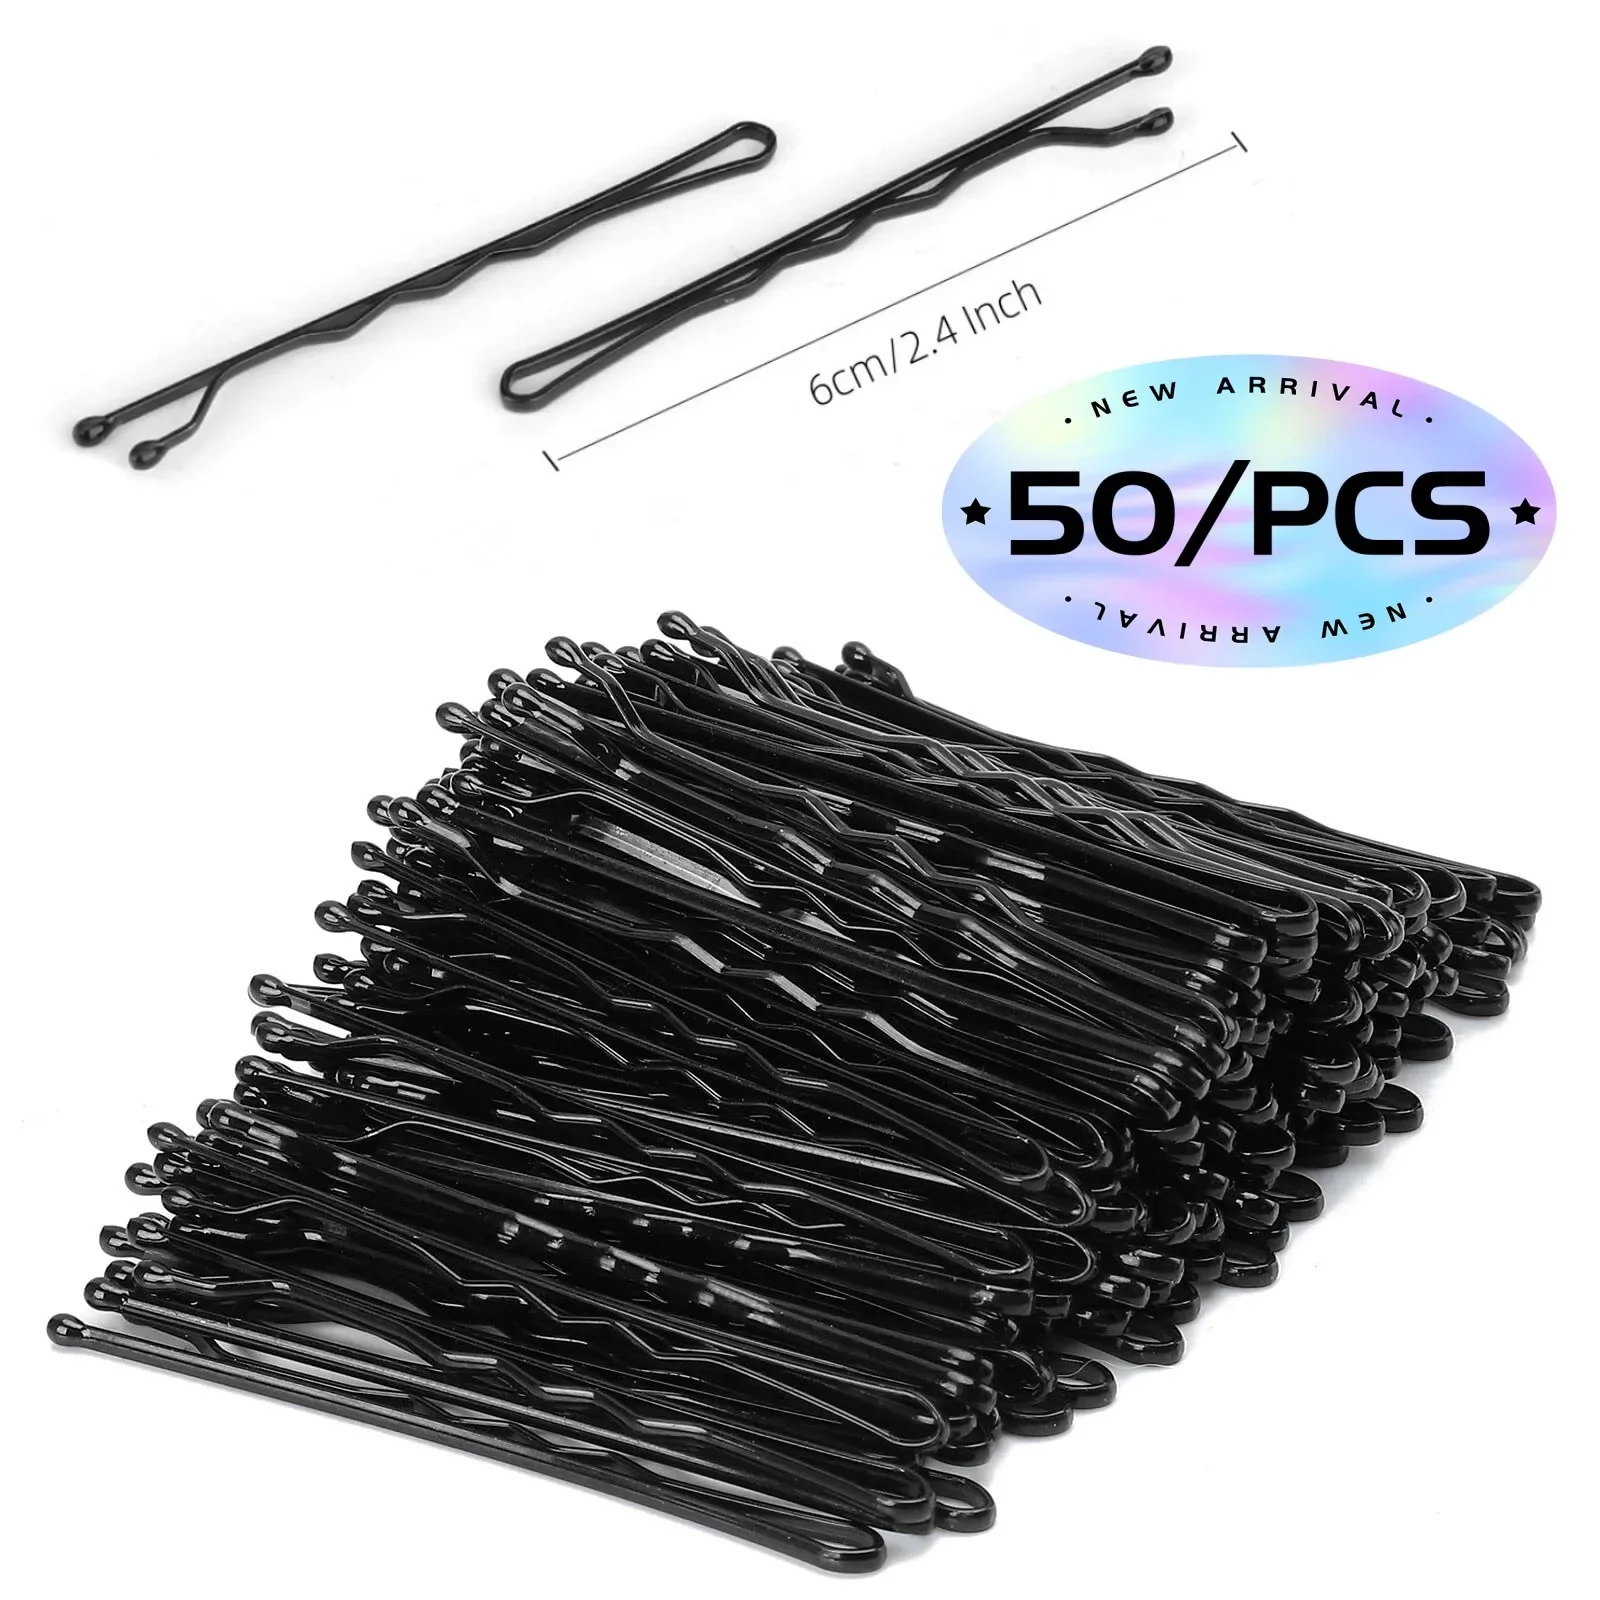 

50PCS 2.4 Inches Hair Pins Kit Secure Hold Bobby Pins Clips for Women Girls and Hairdressing Salon